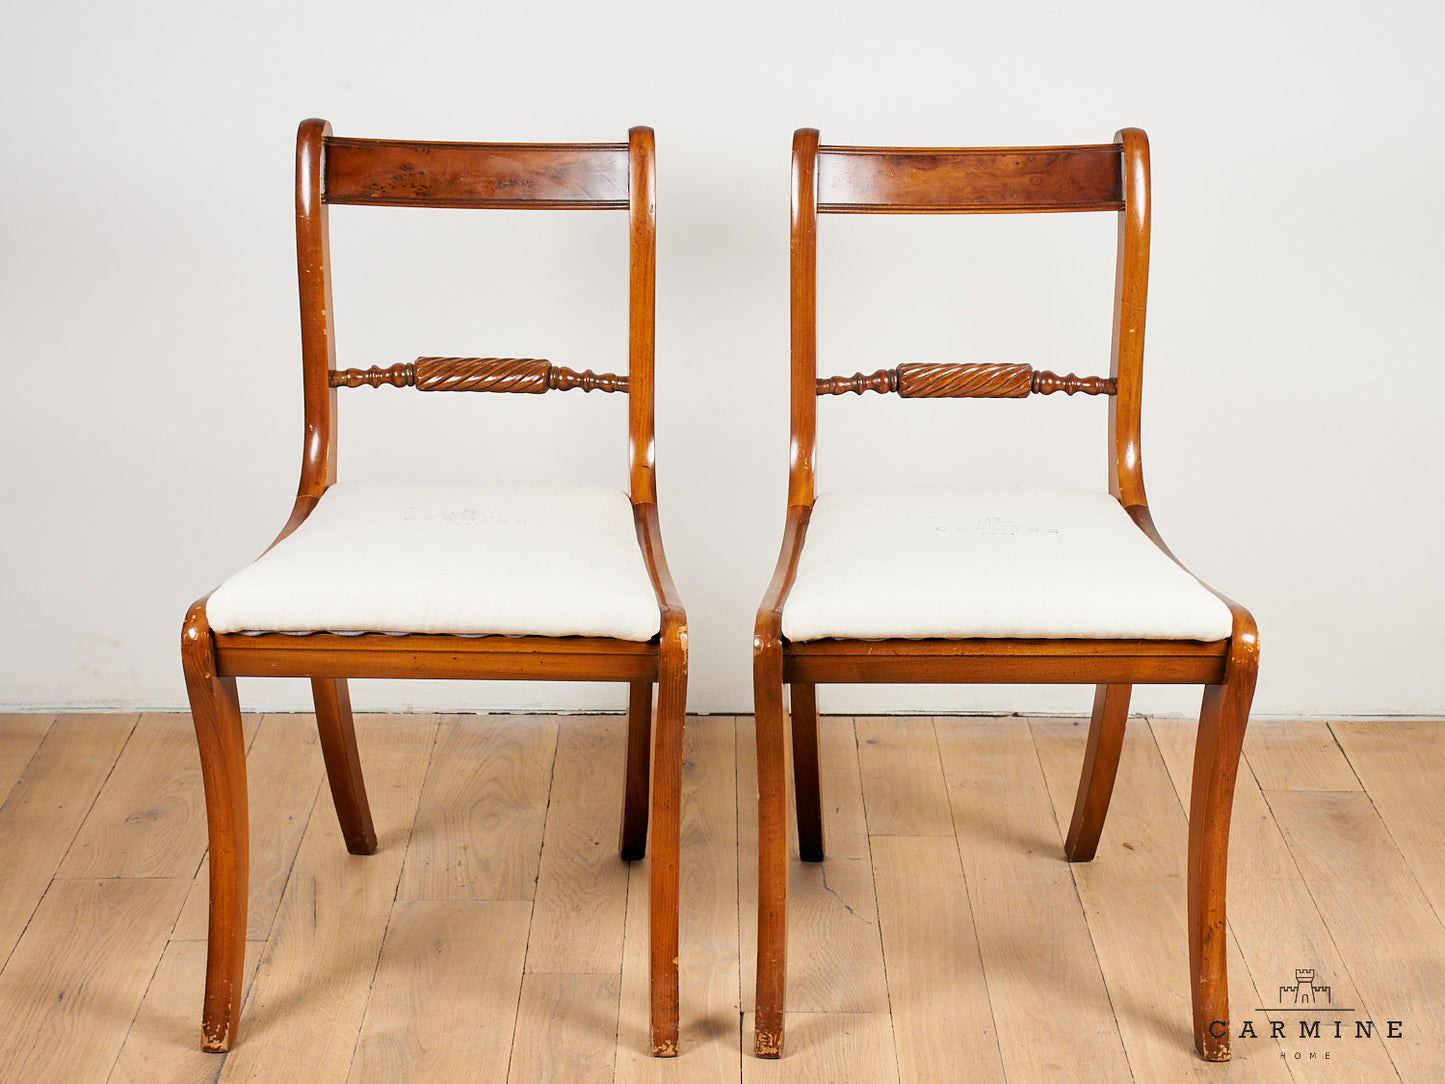 1 pair of twirling chairs